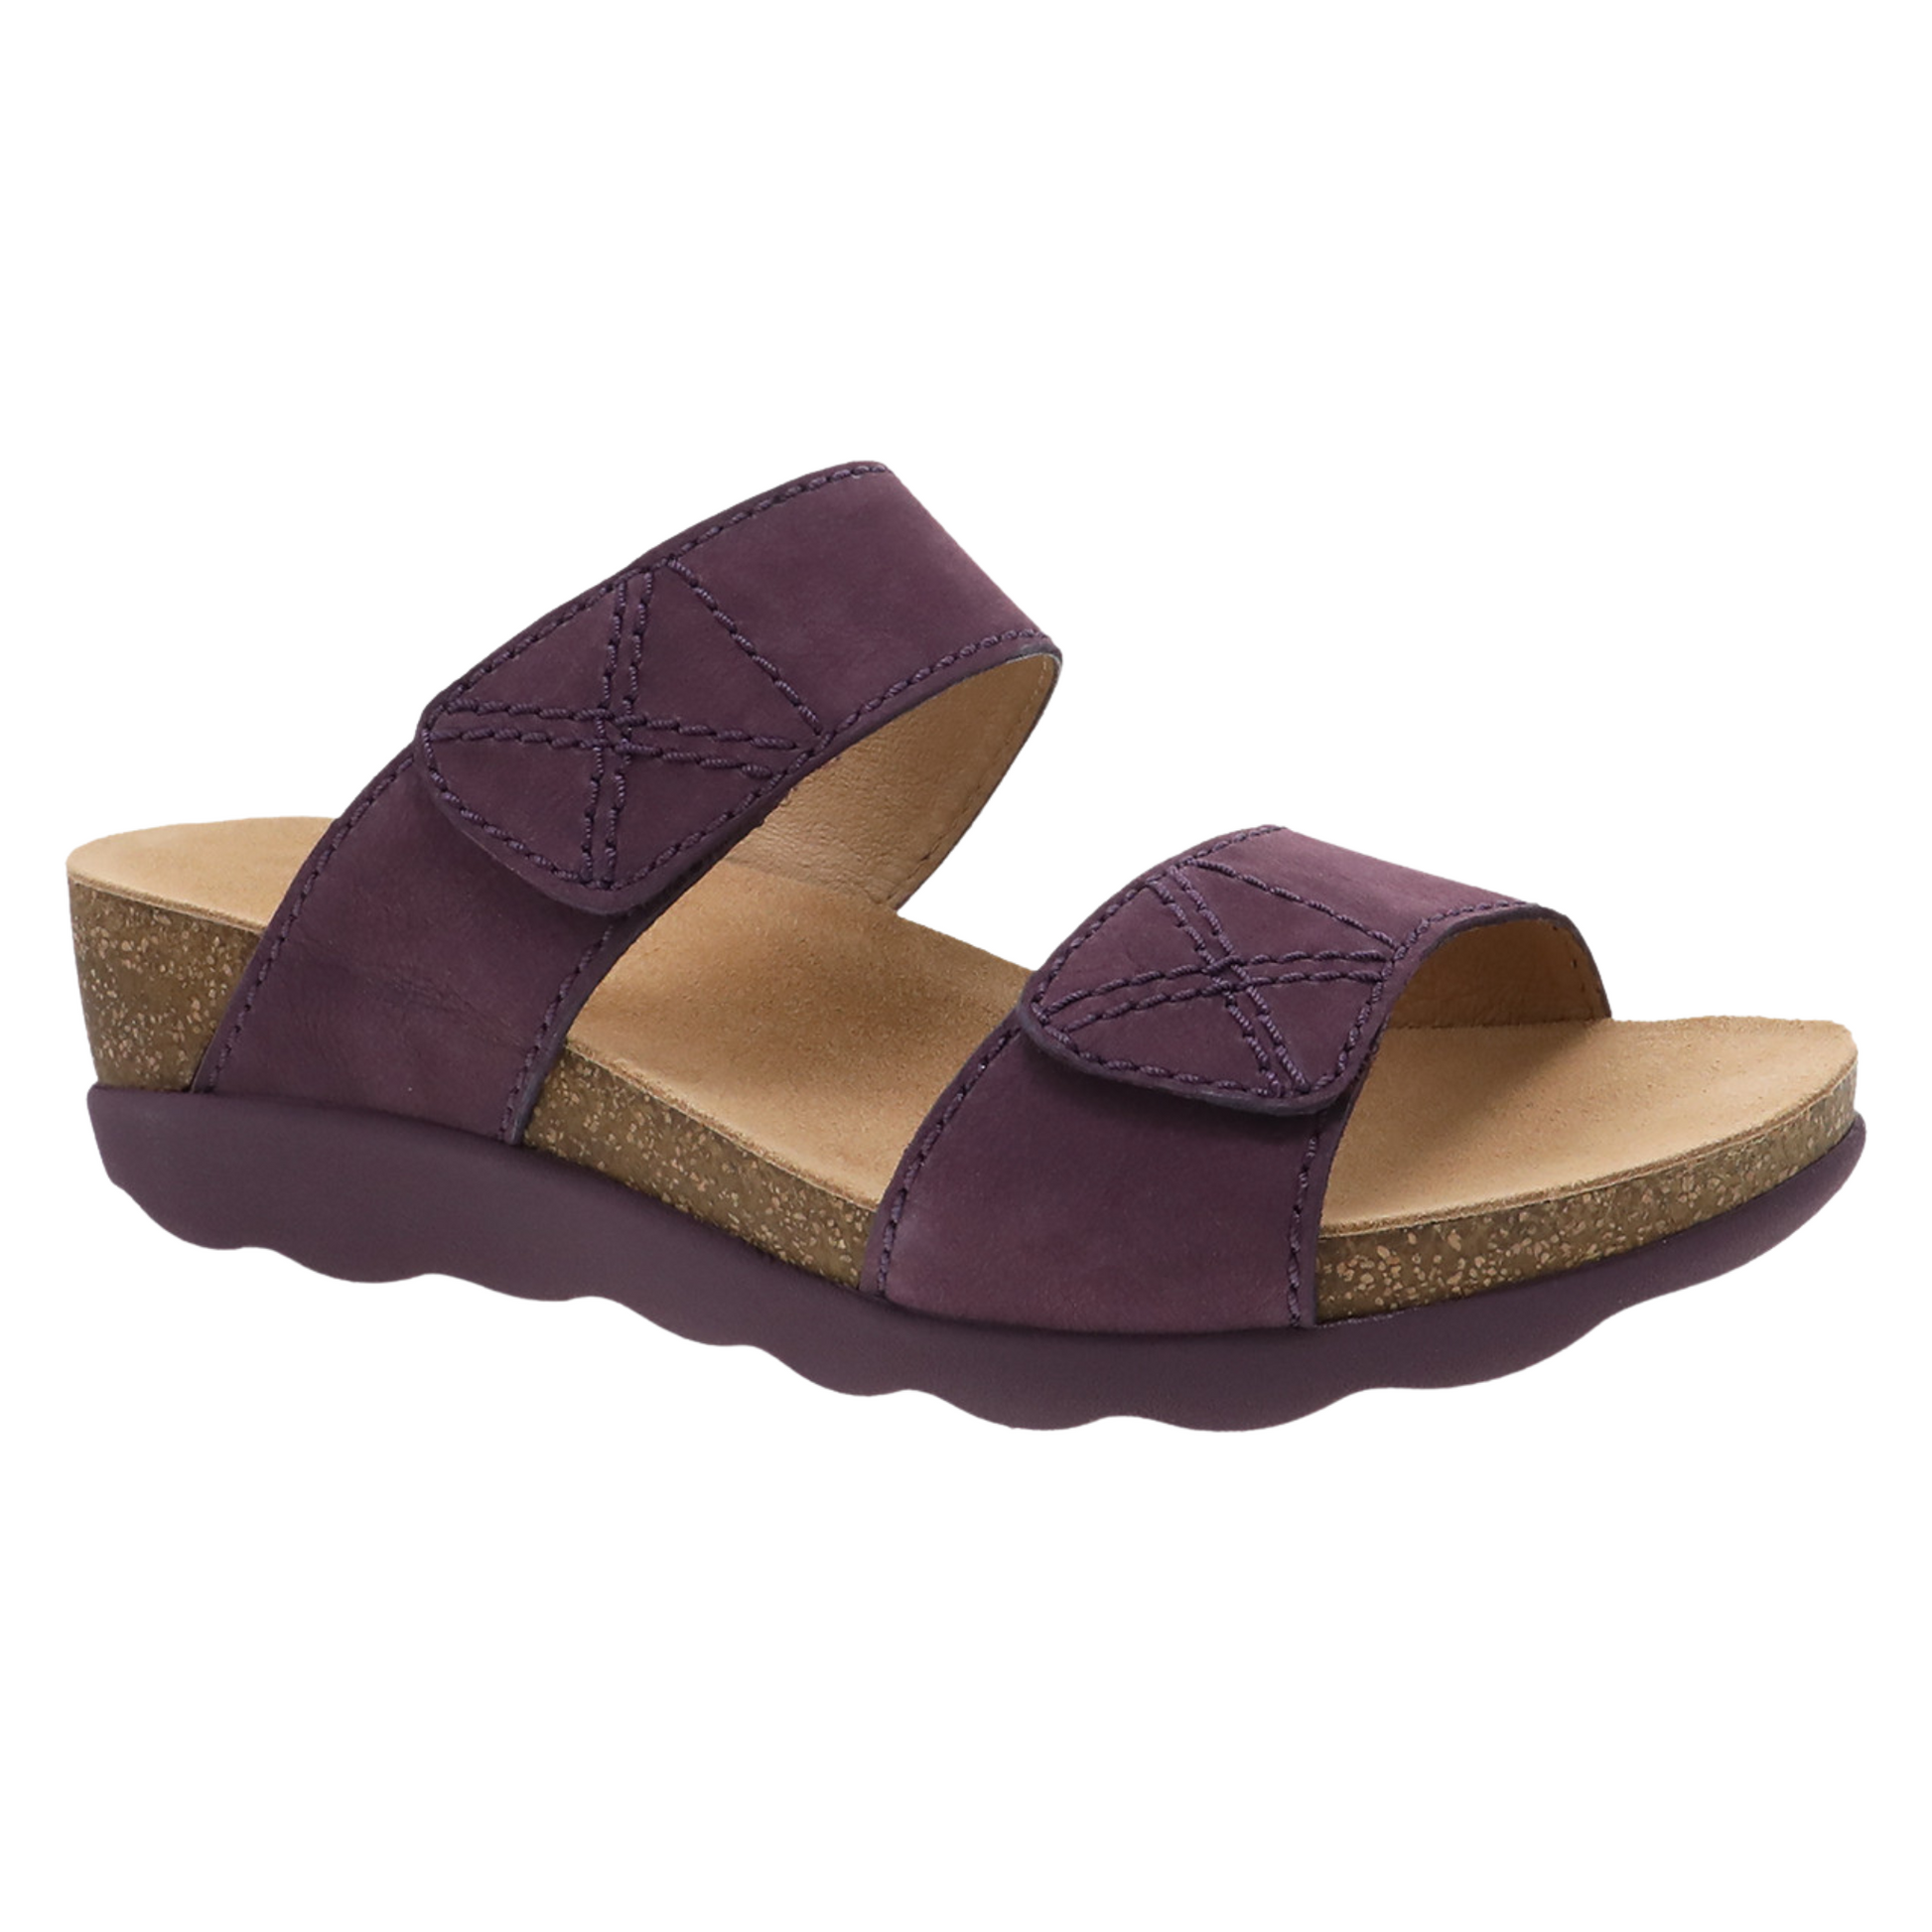 A purple sandal with two leather bands is pictured at an angle and features a purple outsole and cork wedge midsole.